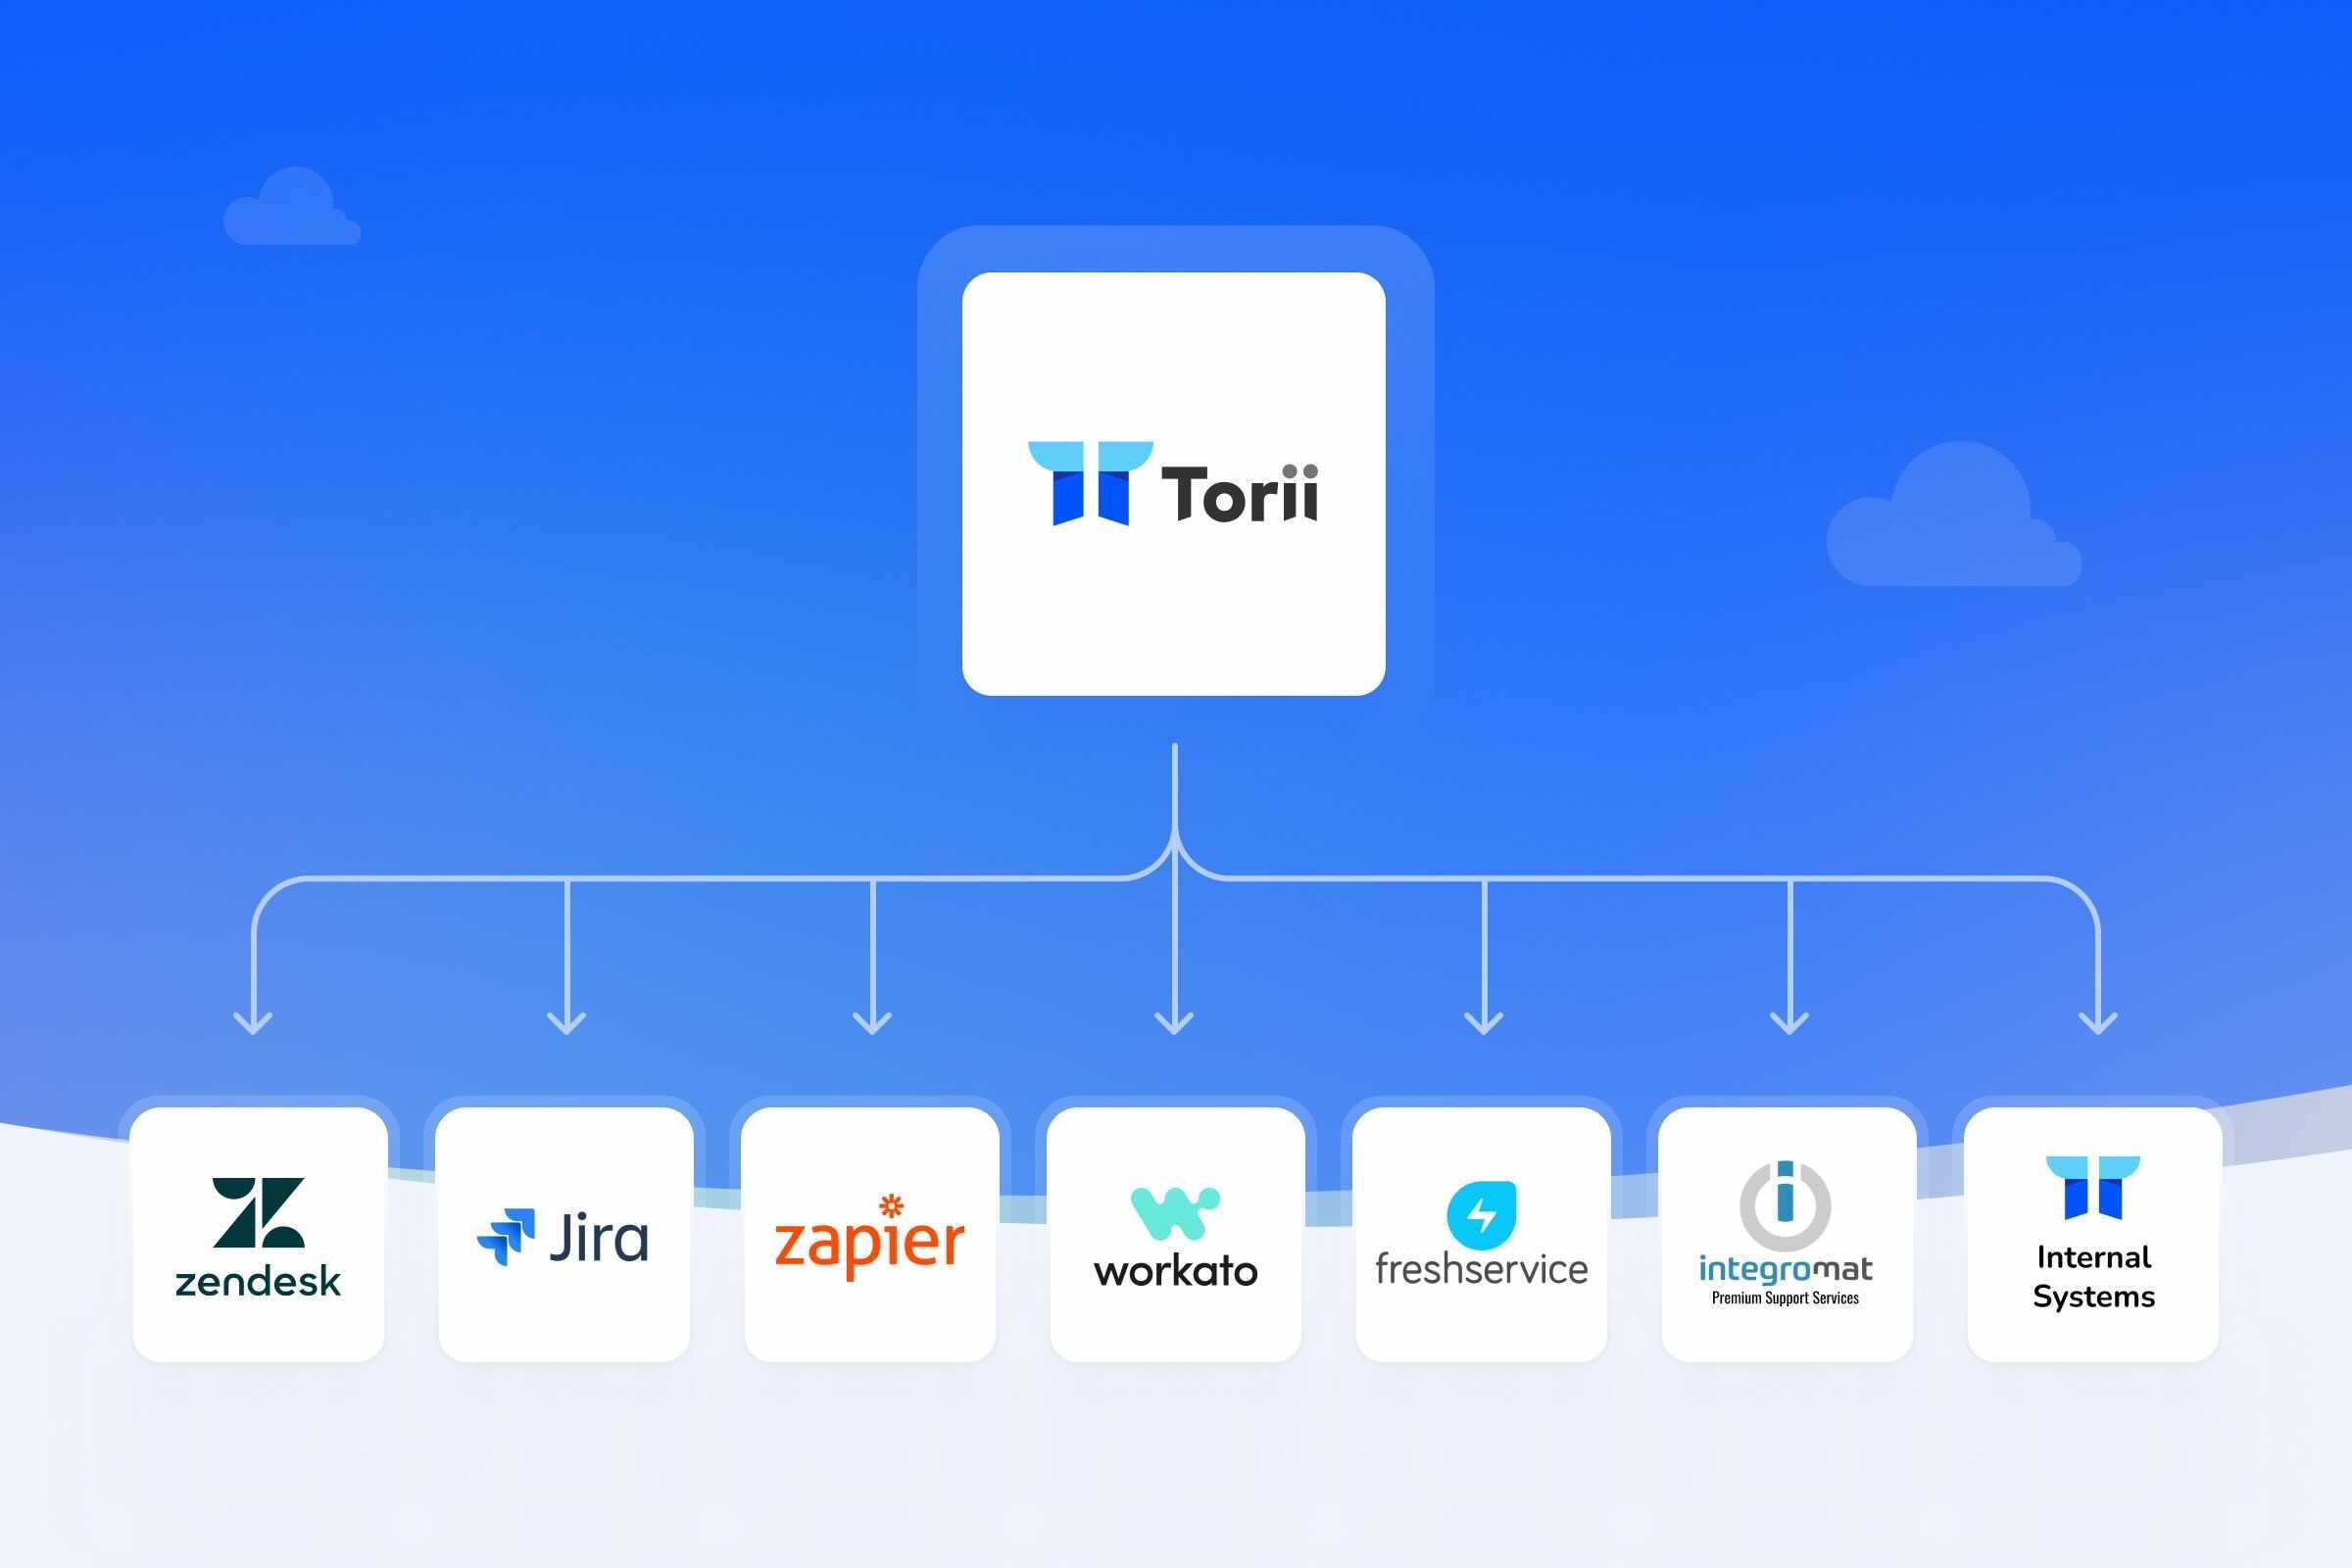 Custom Actions further enhance Torii's automated SaaS management